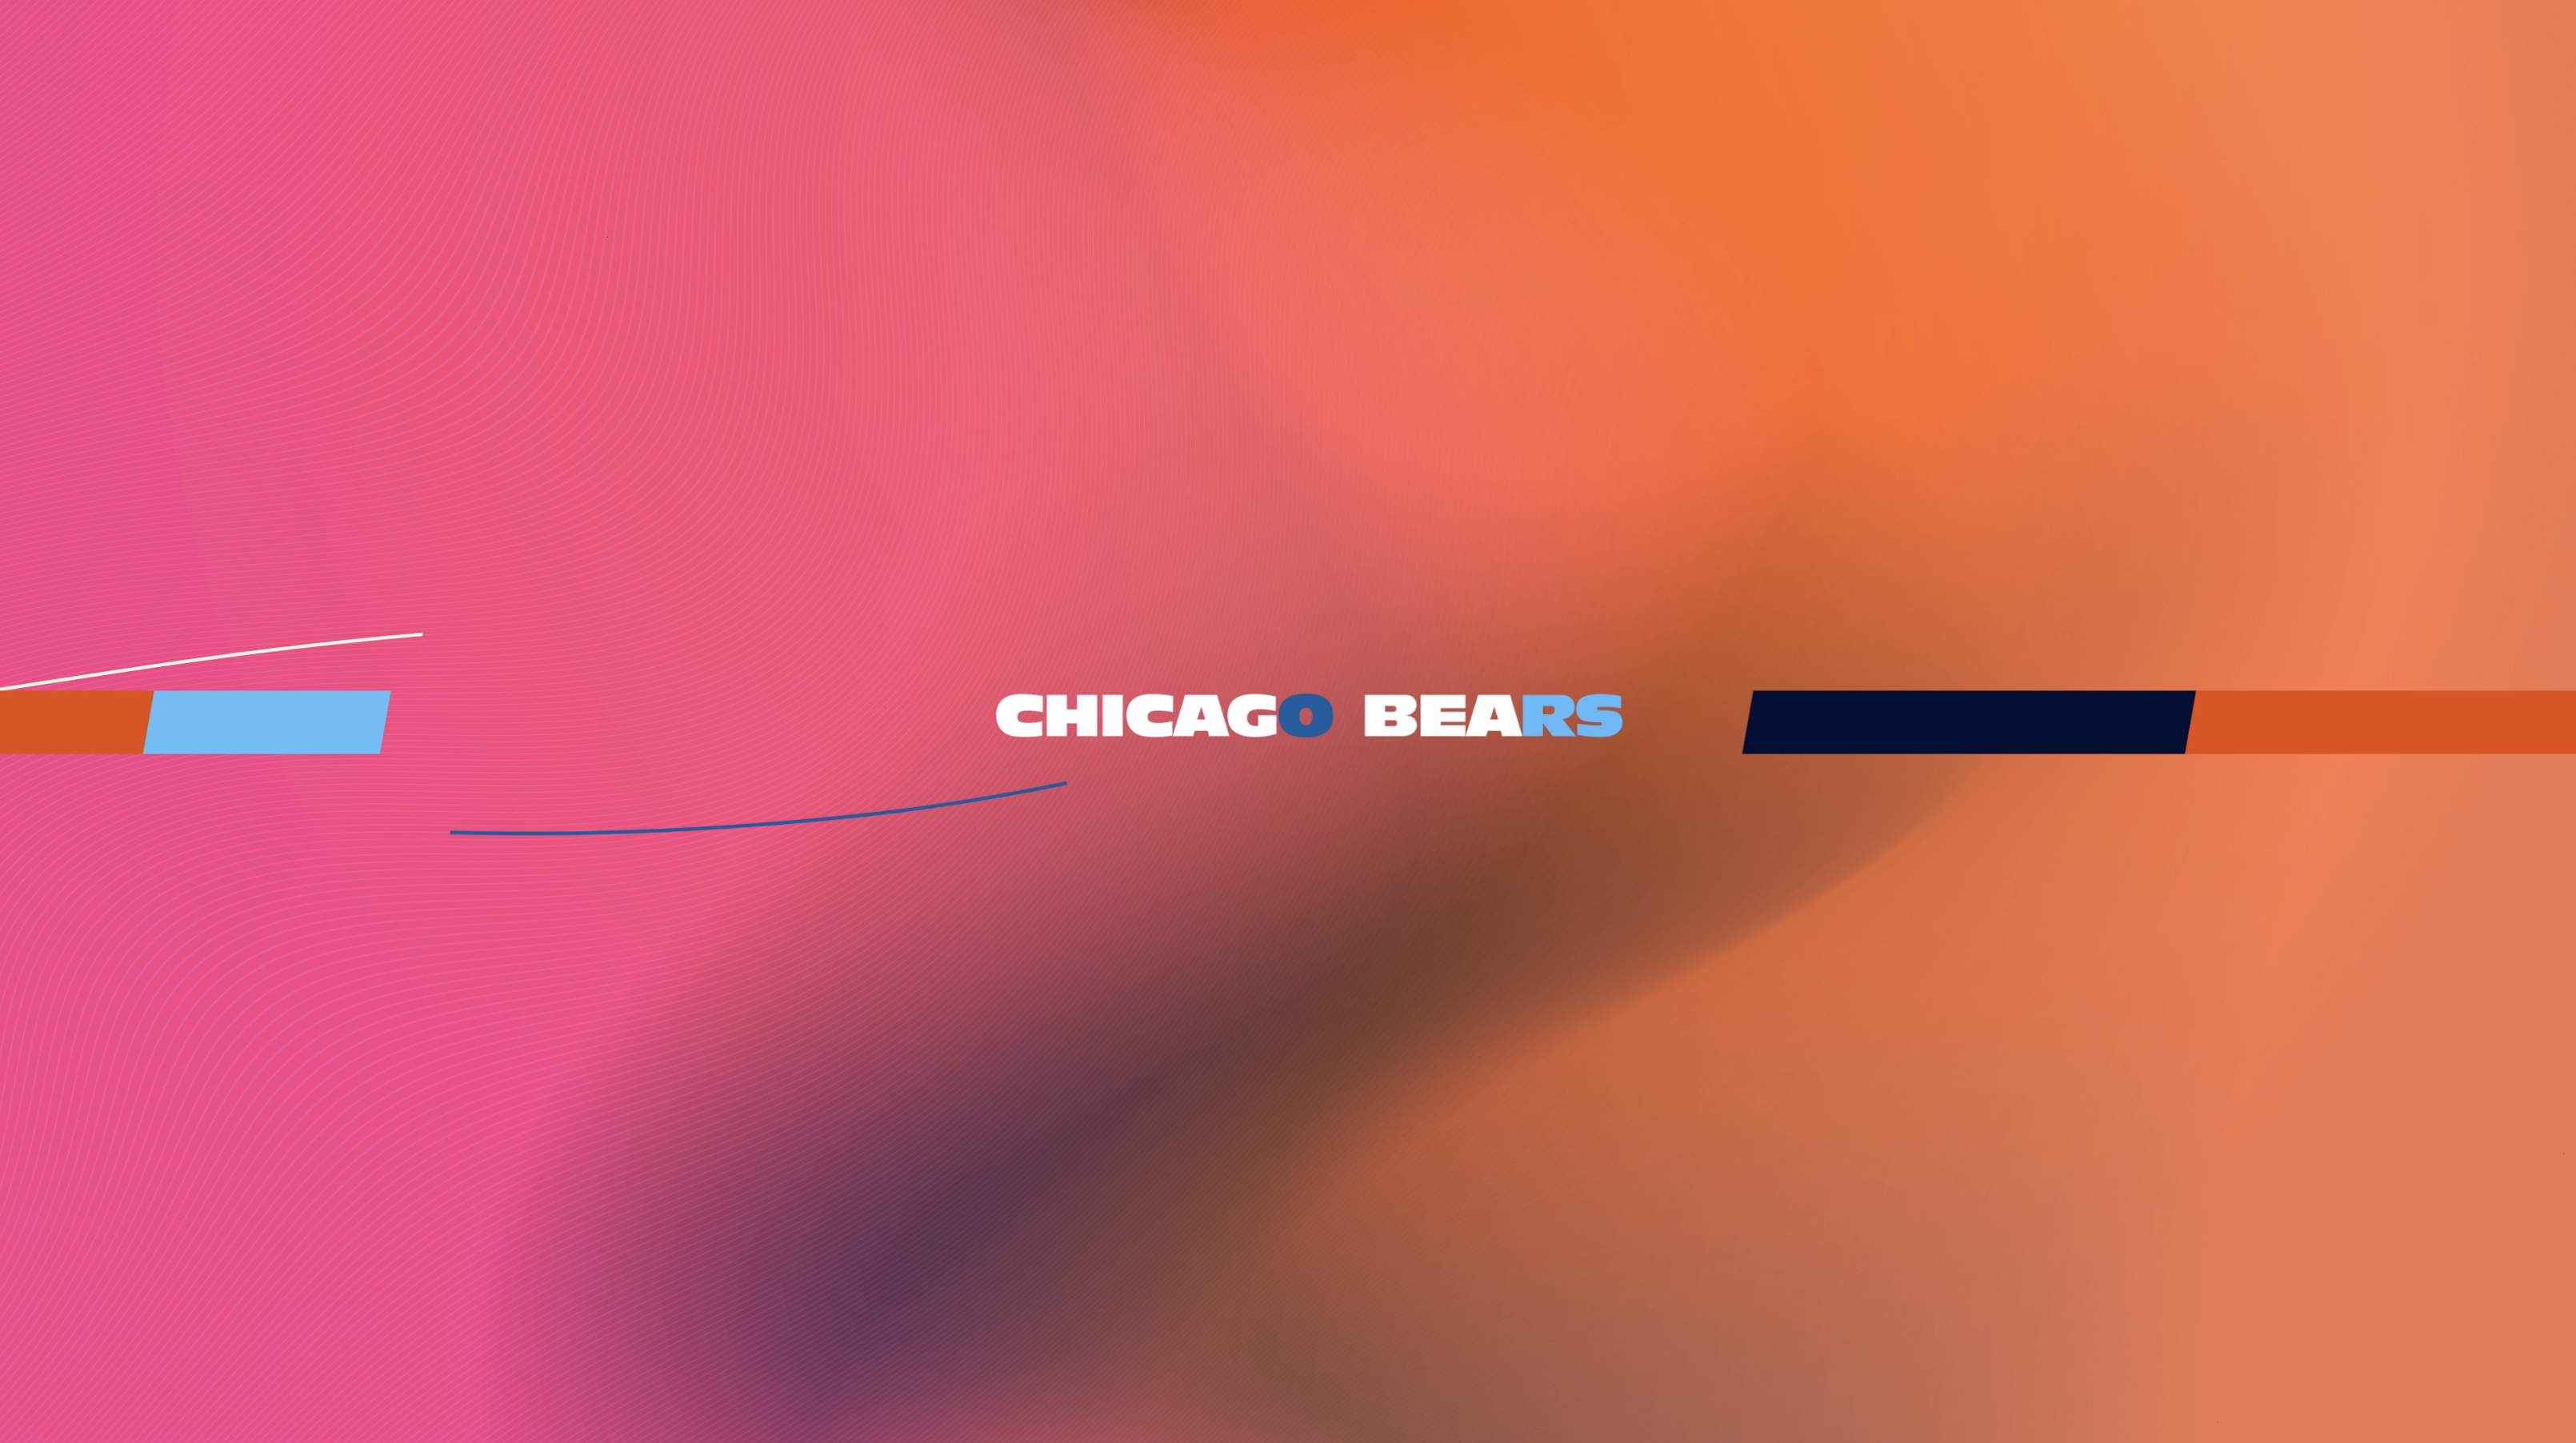 Athletico Physical Therapy x Chicago Bears Partnership